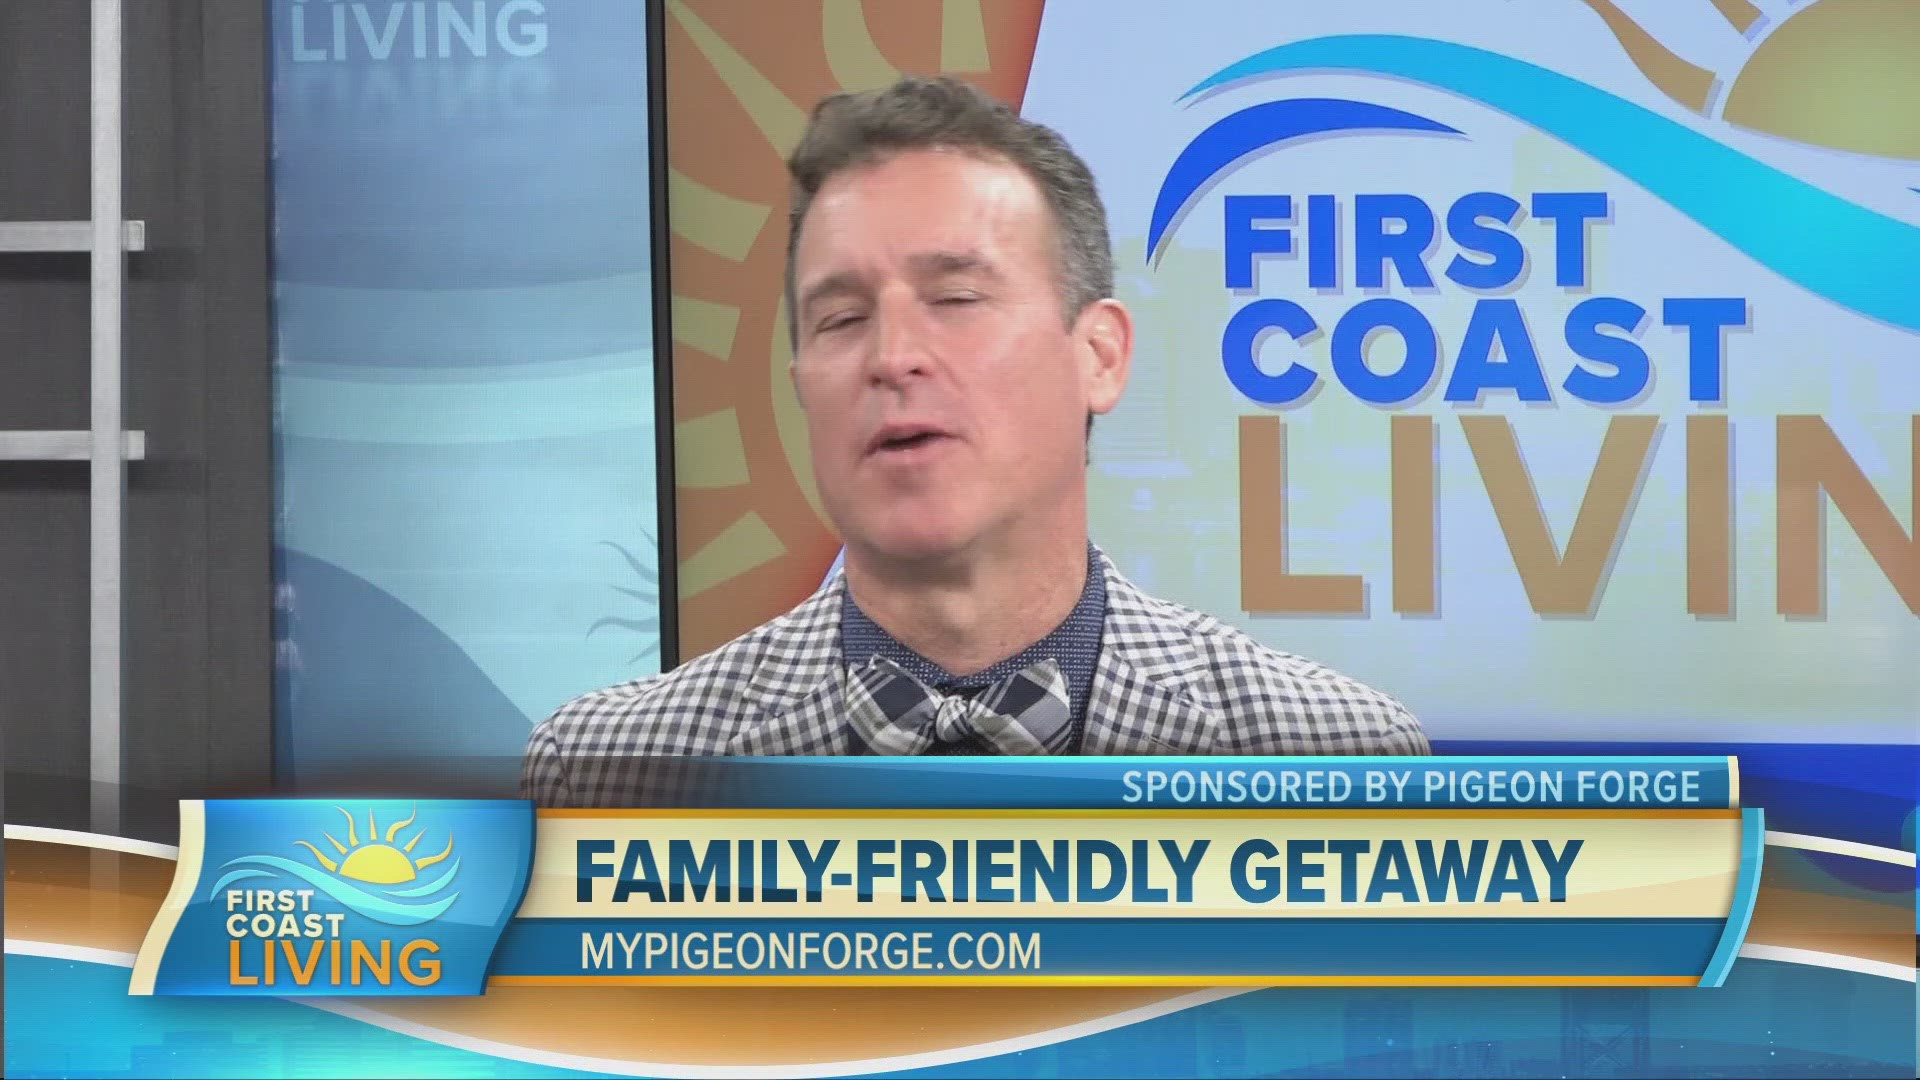 Mayor of Pigeon Forge, David Wear, will talk about his favorite family-friendly destination.